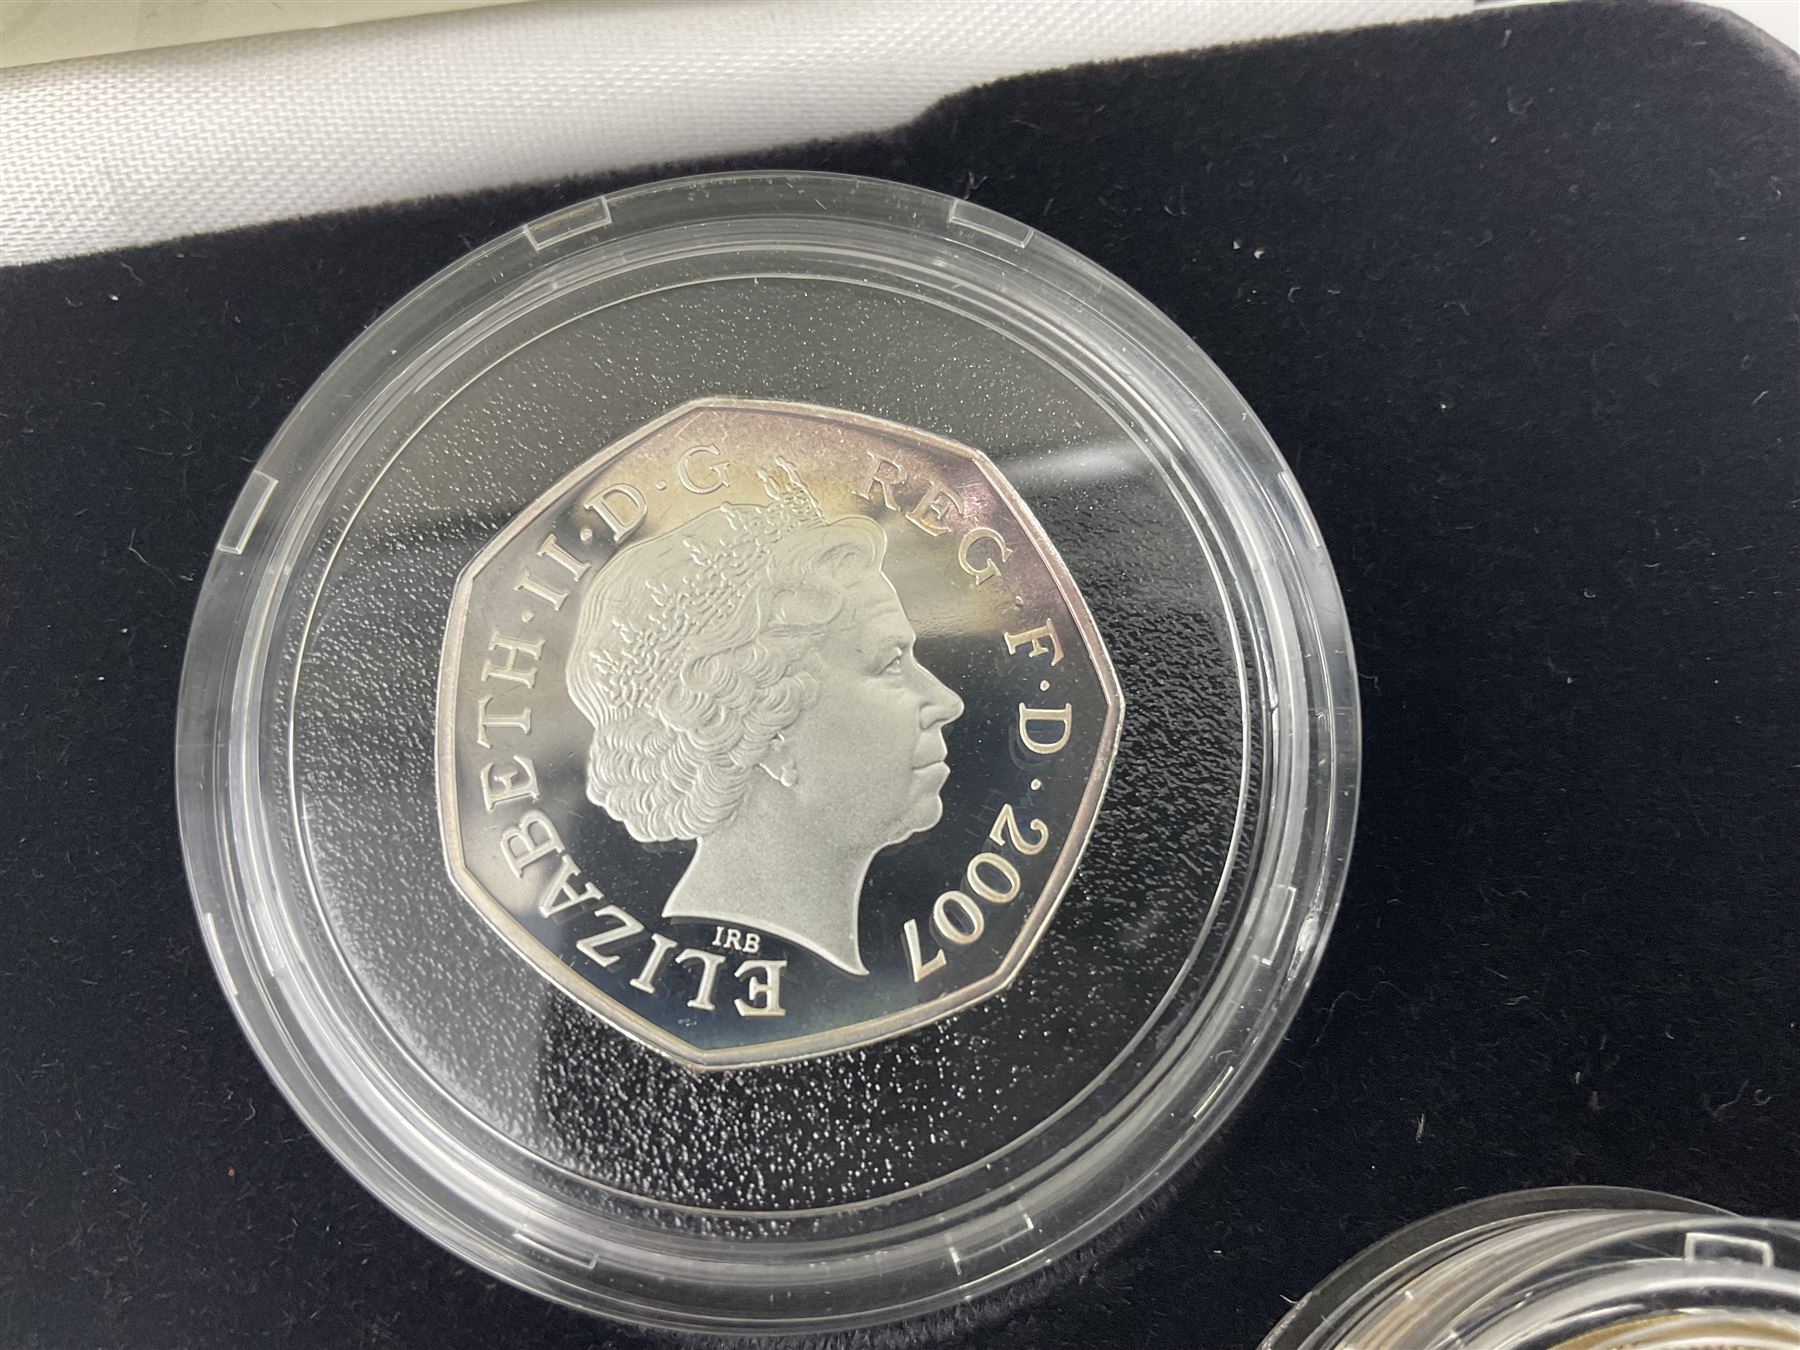 The Royal Mint United Kingdom 2007 silver proof piedfort five coin collection - Image 4 of 6